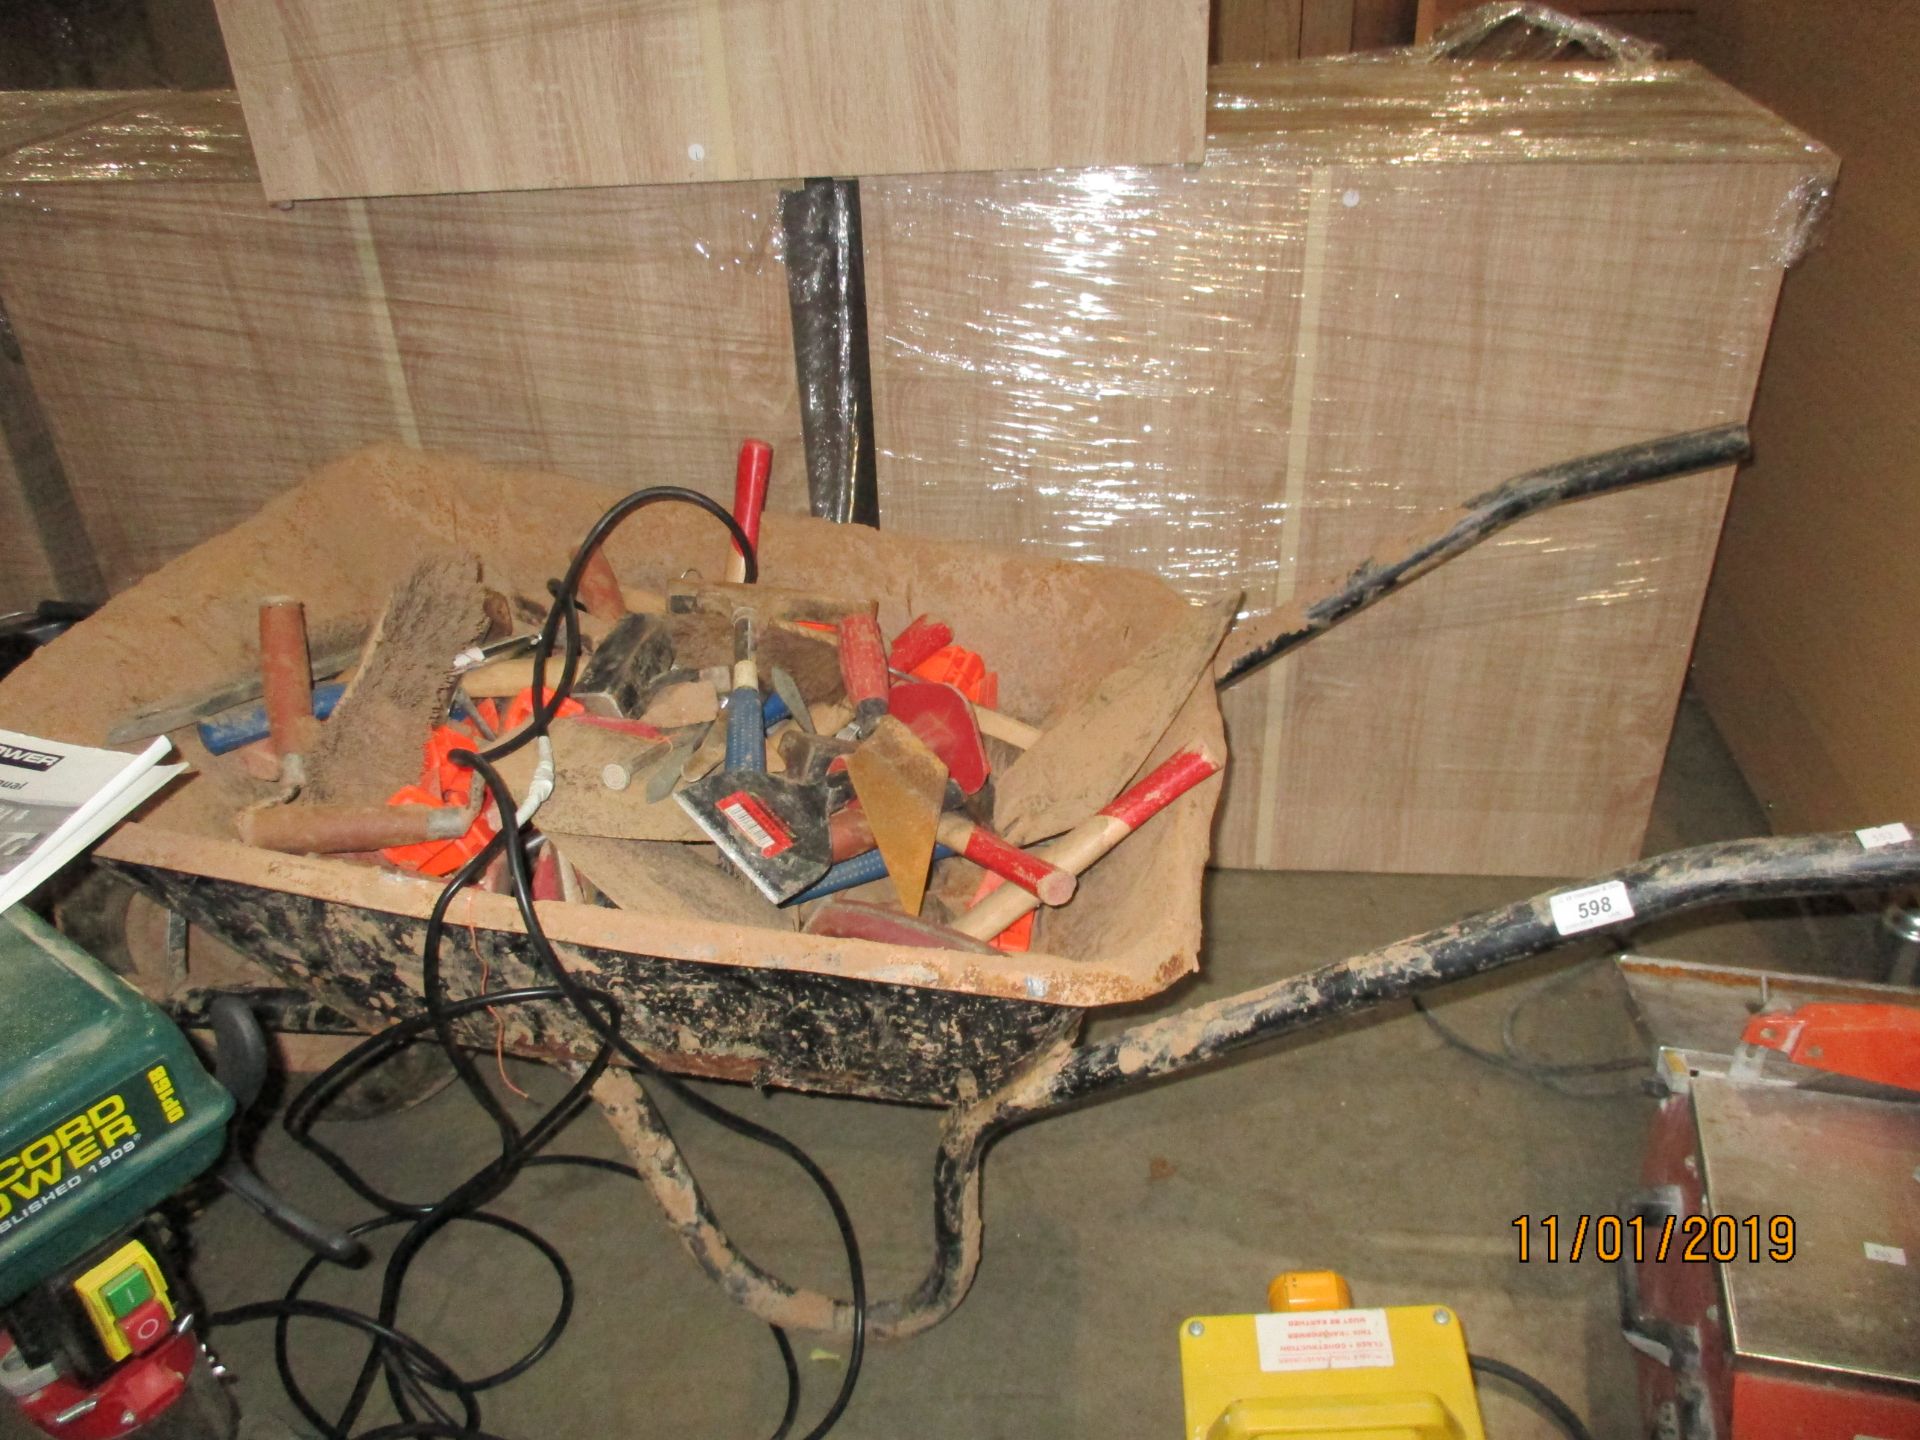 A black metal wheel barrow and contents - plasterers' trowels, brush heads, mallets etc.